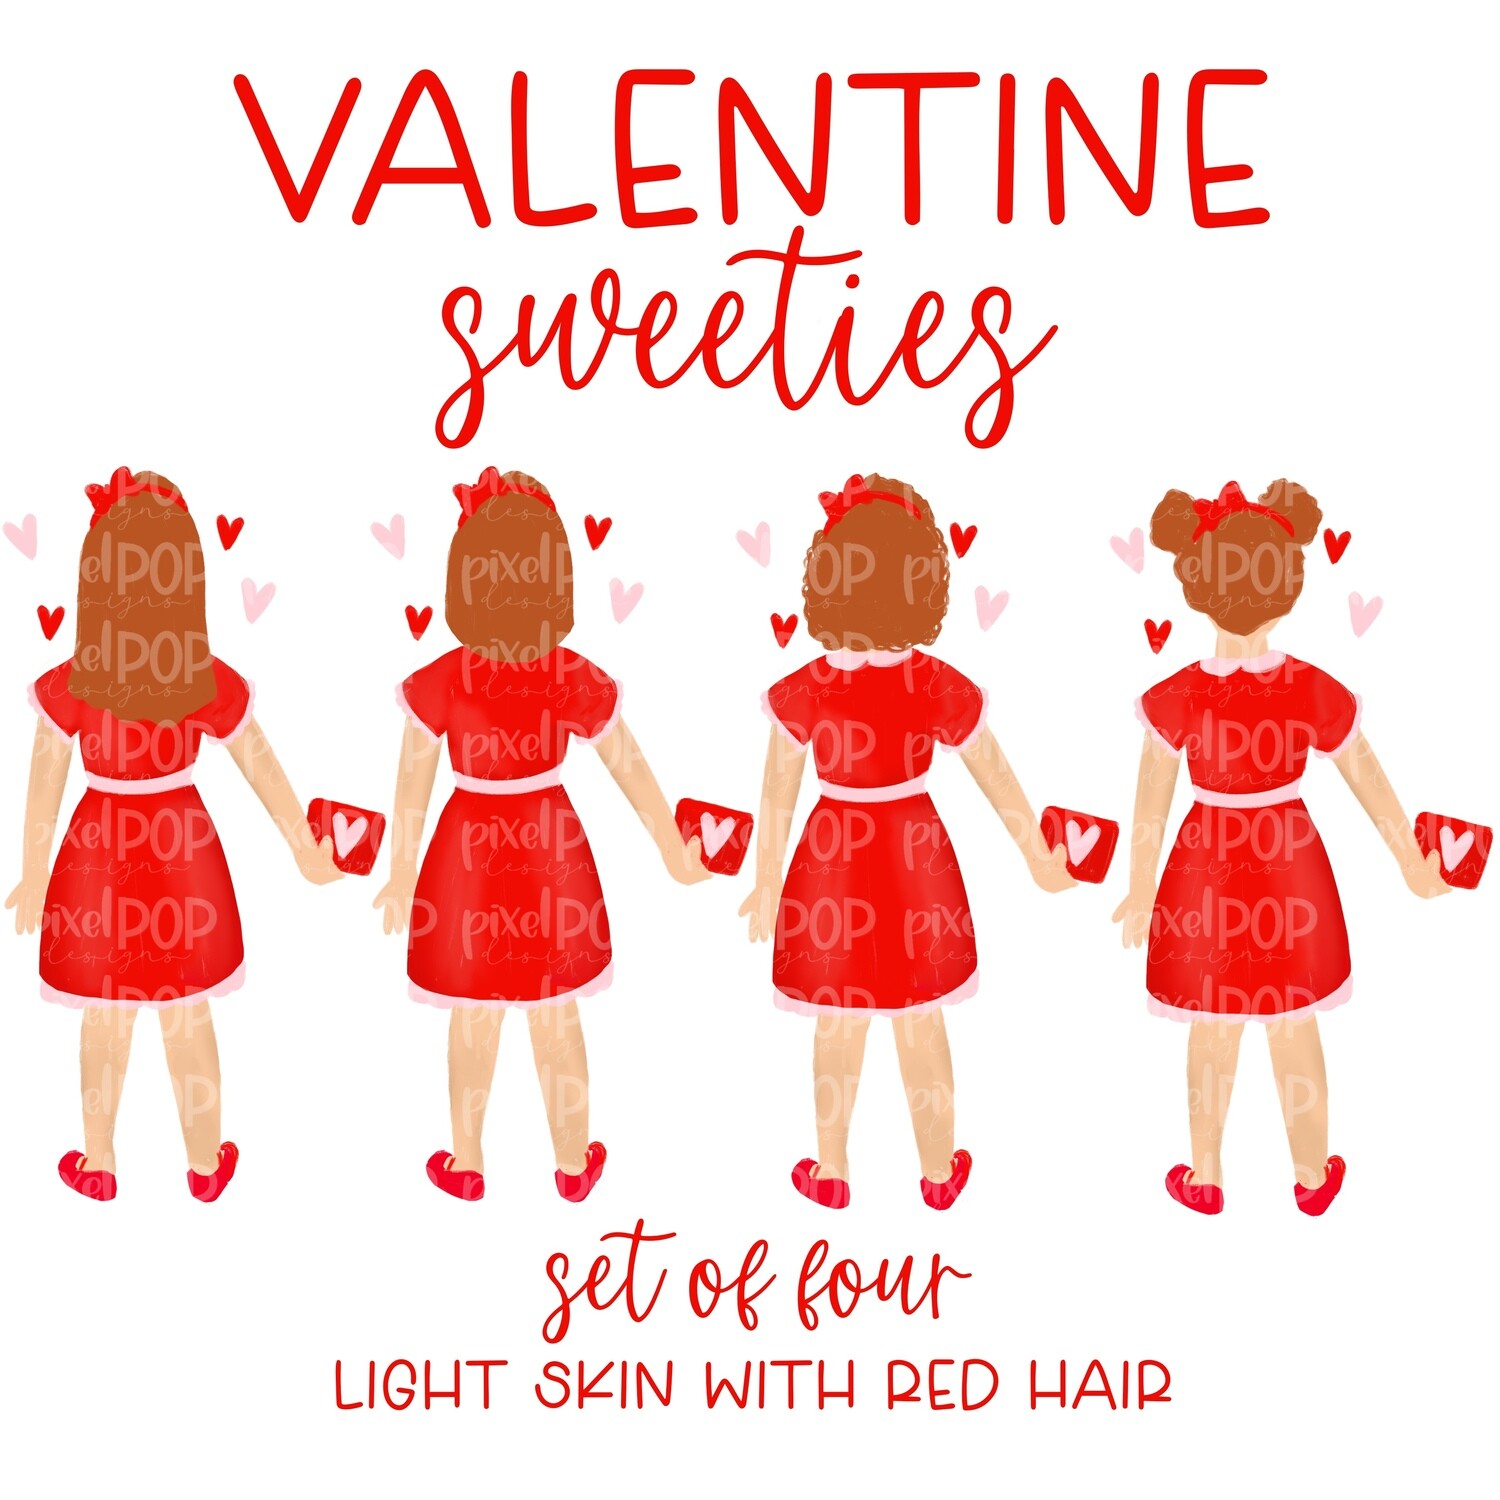 Valentine Sweeties Light Skin Red Hair Girl Figures PNG | Valentines Day | Family Ornament | Family Portrait | Digital Portrait | Art